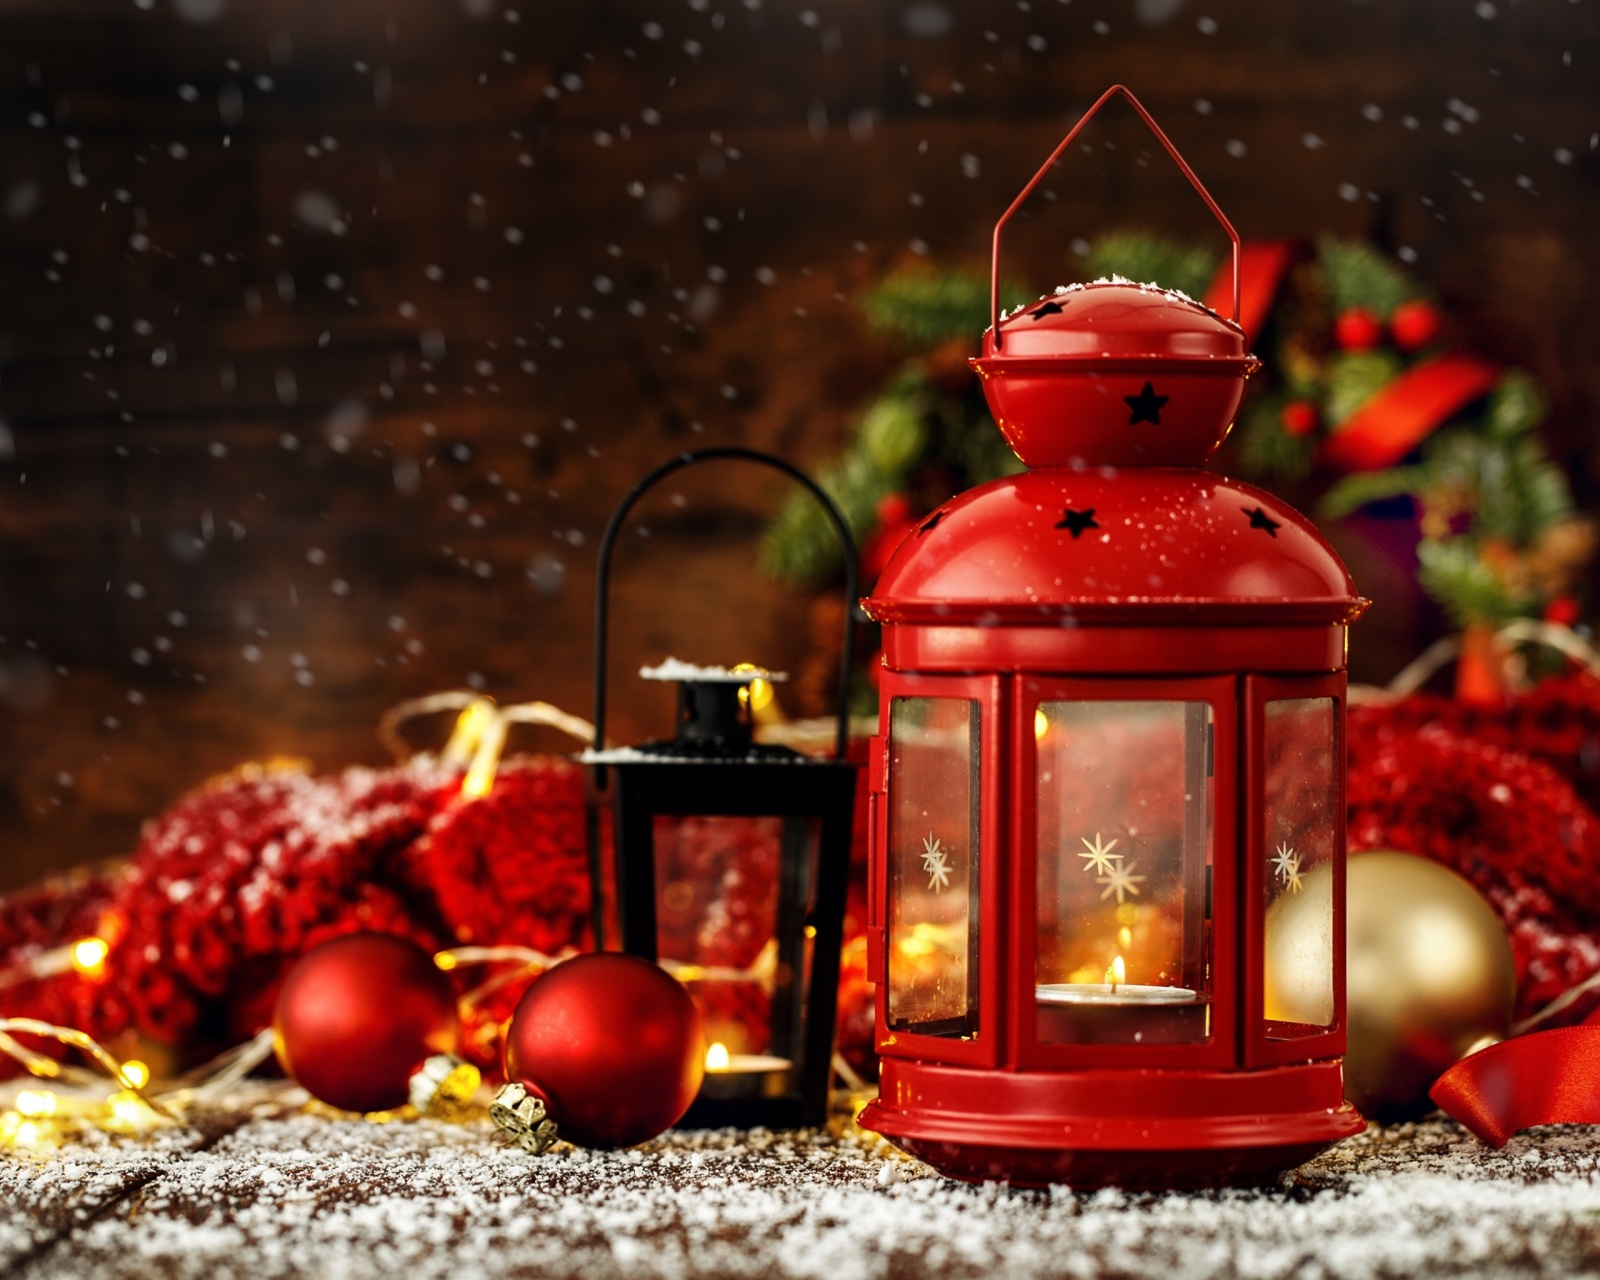 Das Christmas candles with holiday decor Wallpaper 1600x1280